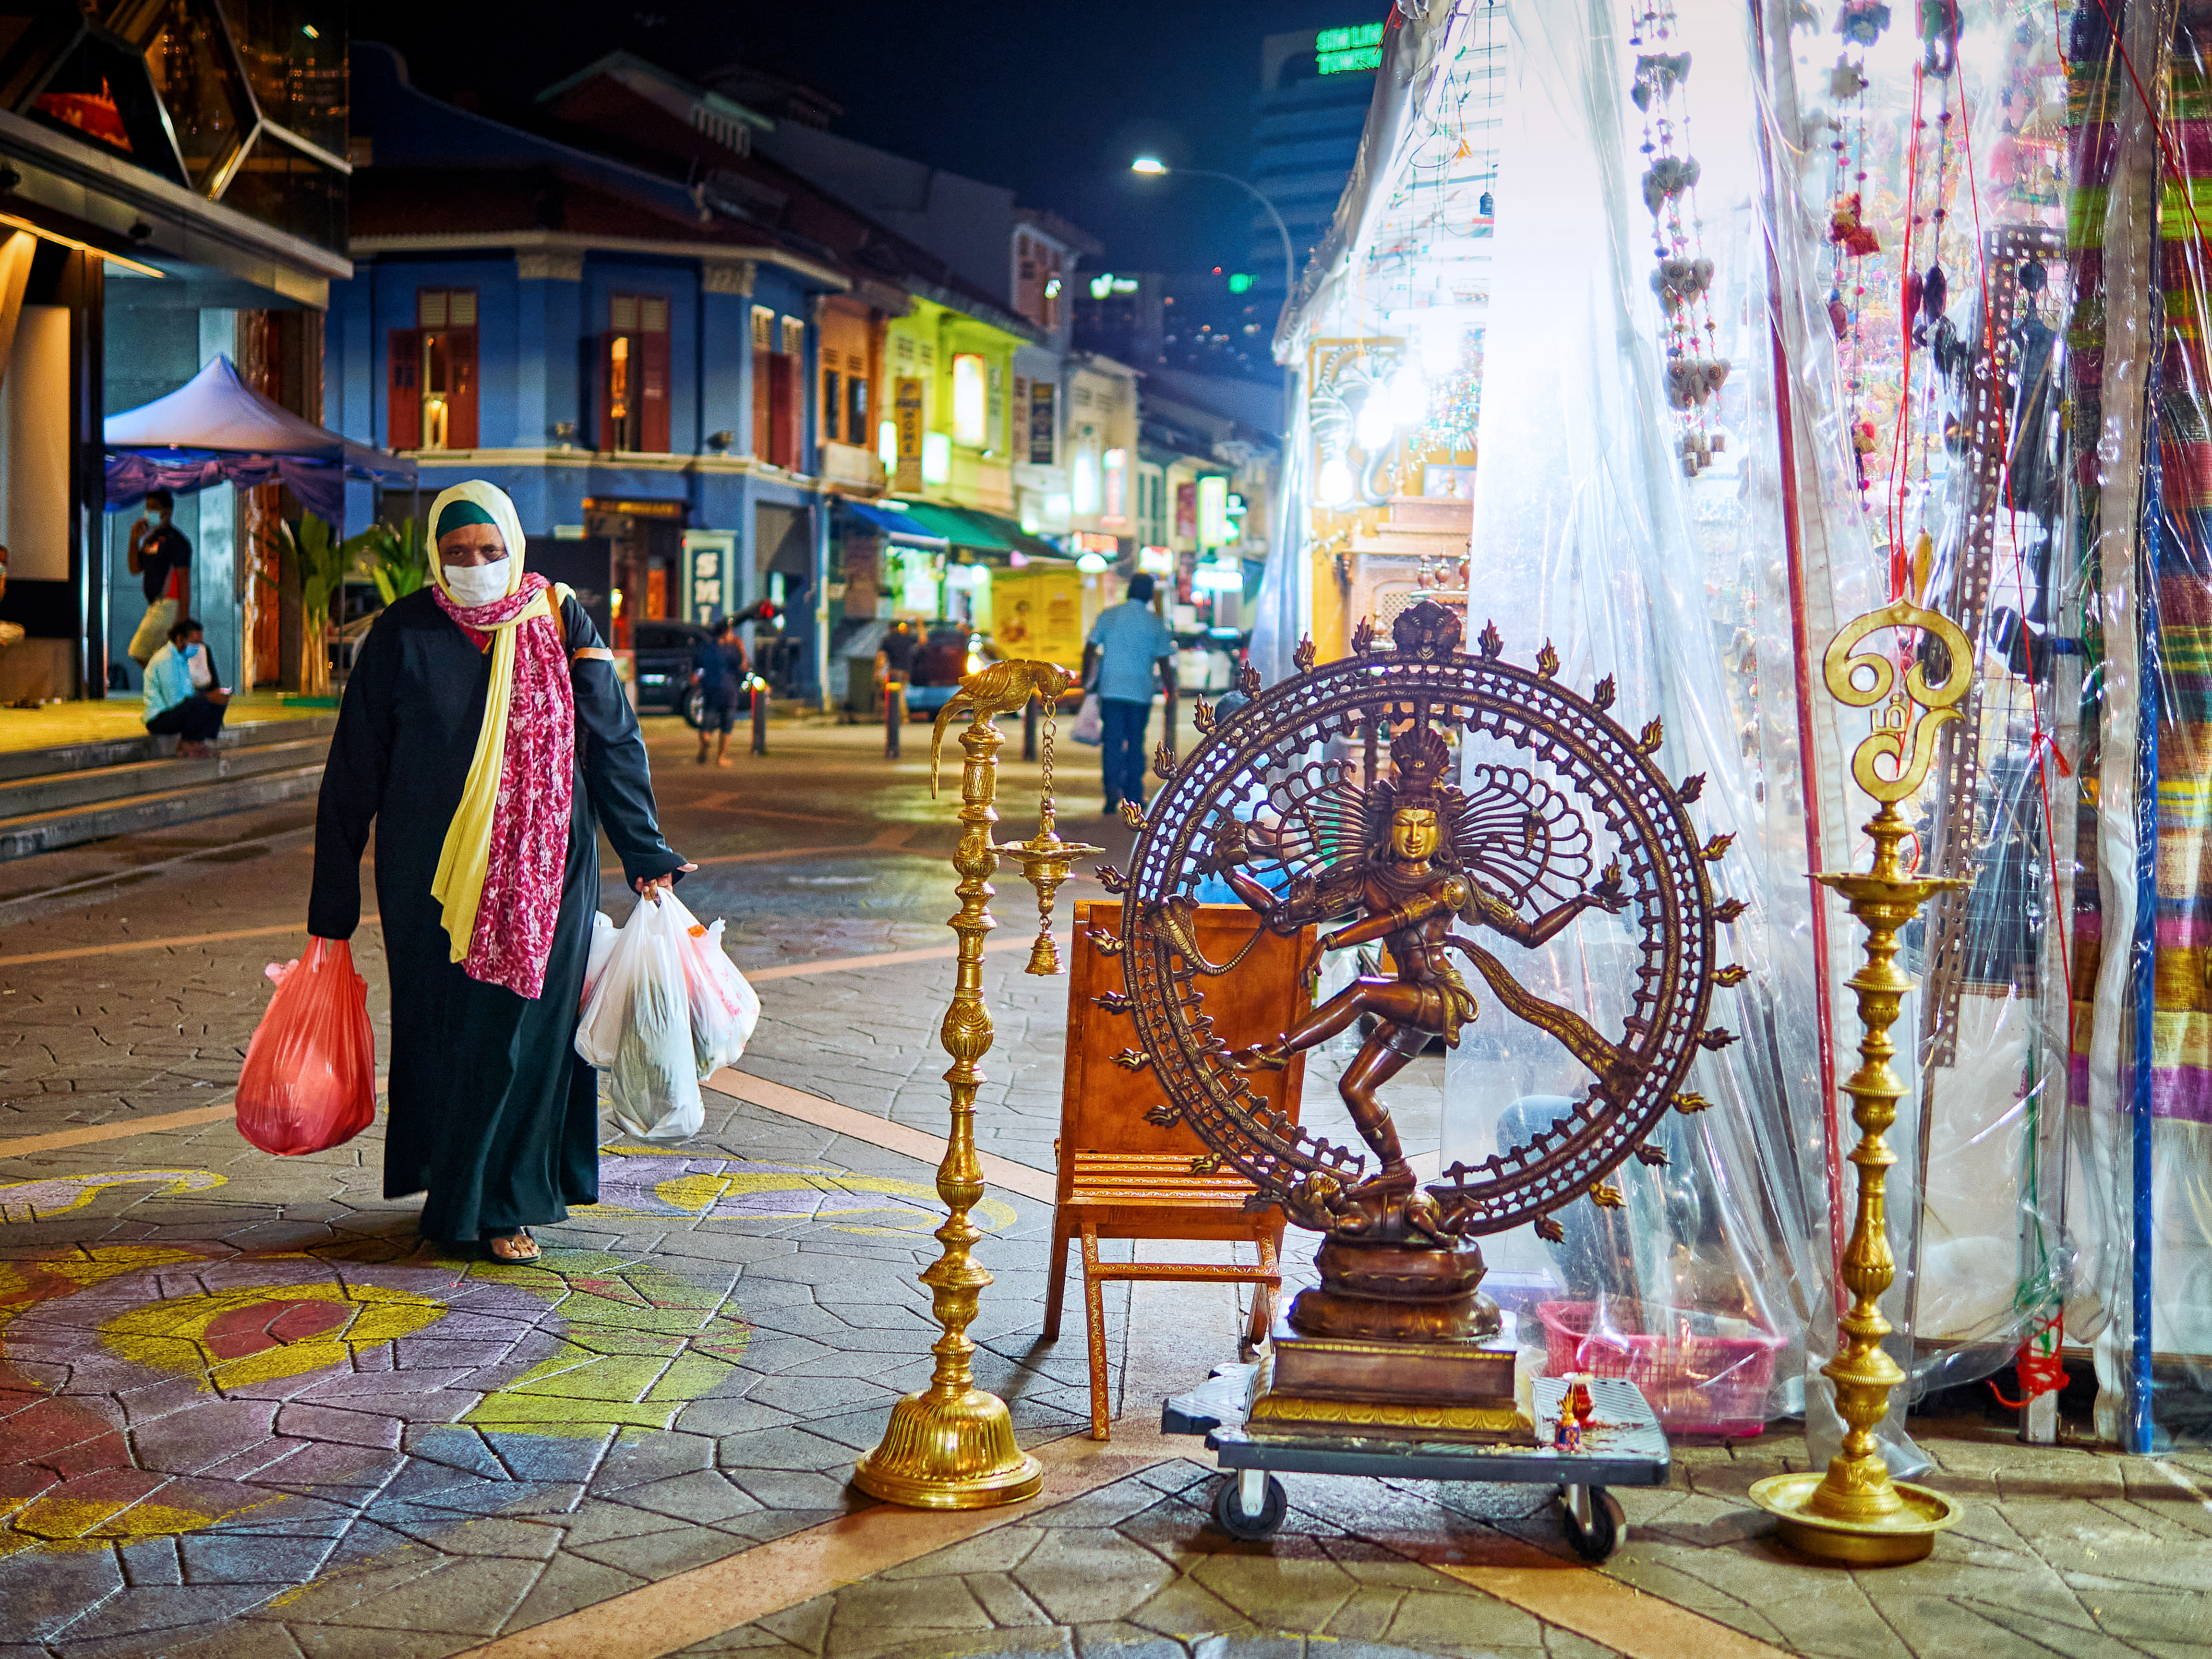 Nataraja Statue on display and one woman walking by after her shopping, a street scene at Little India, Singapore